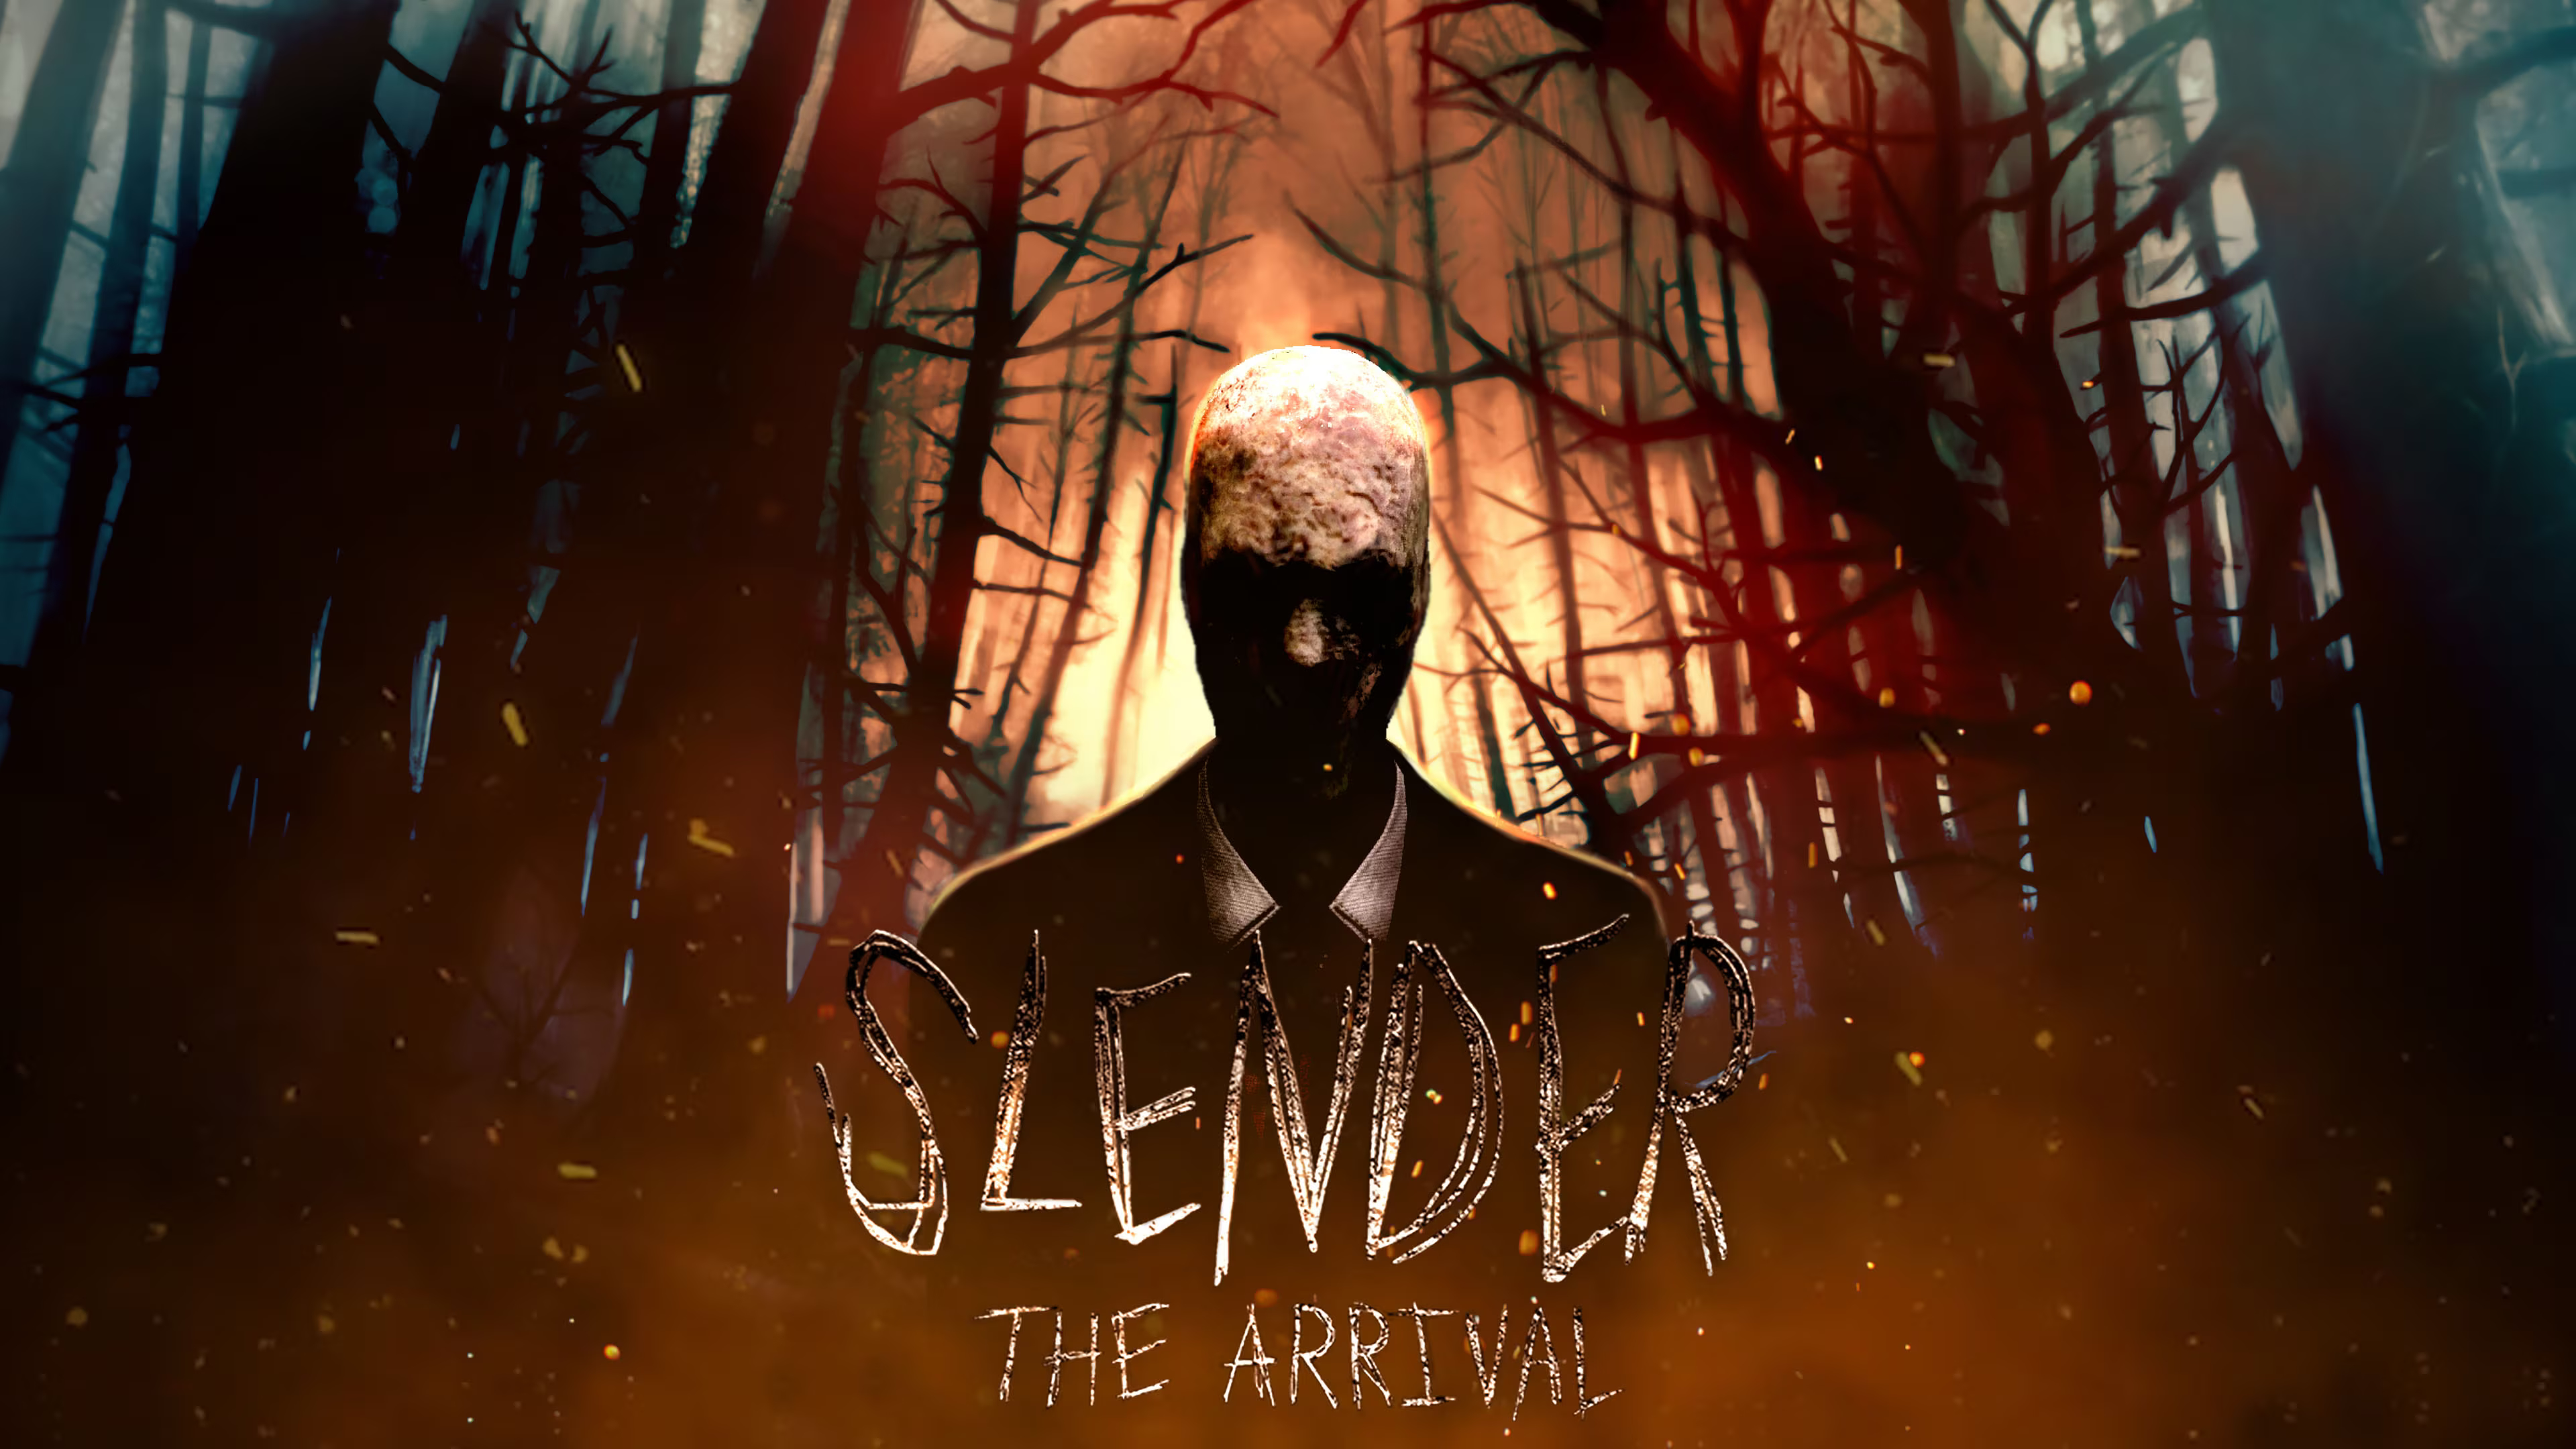 Slendergirl Must Die The House for Android - Free App Download